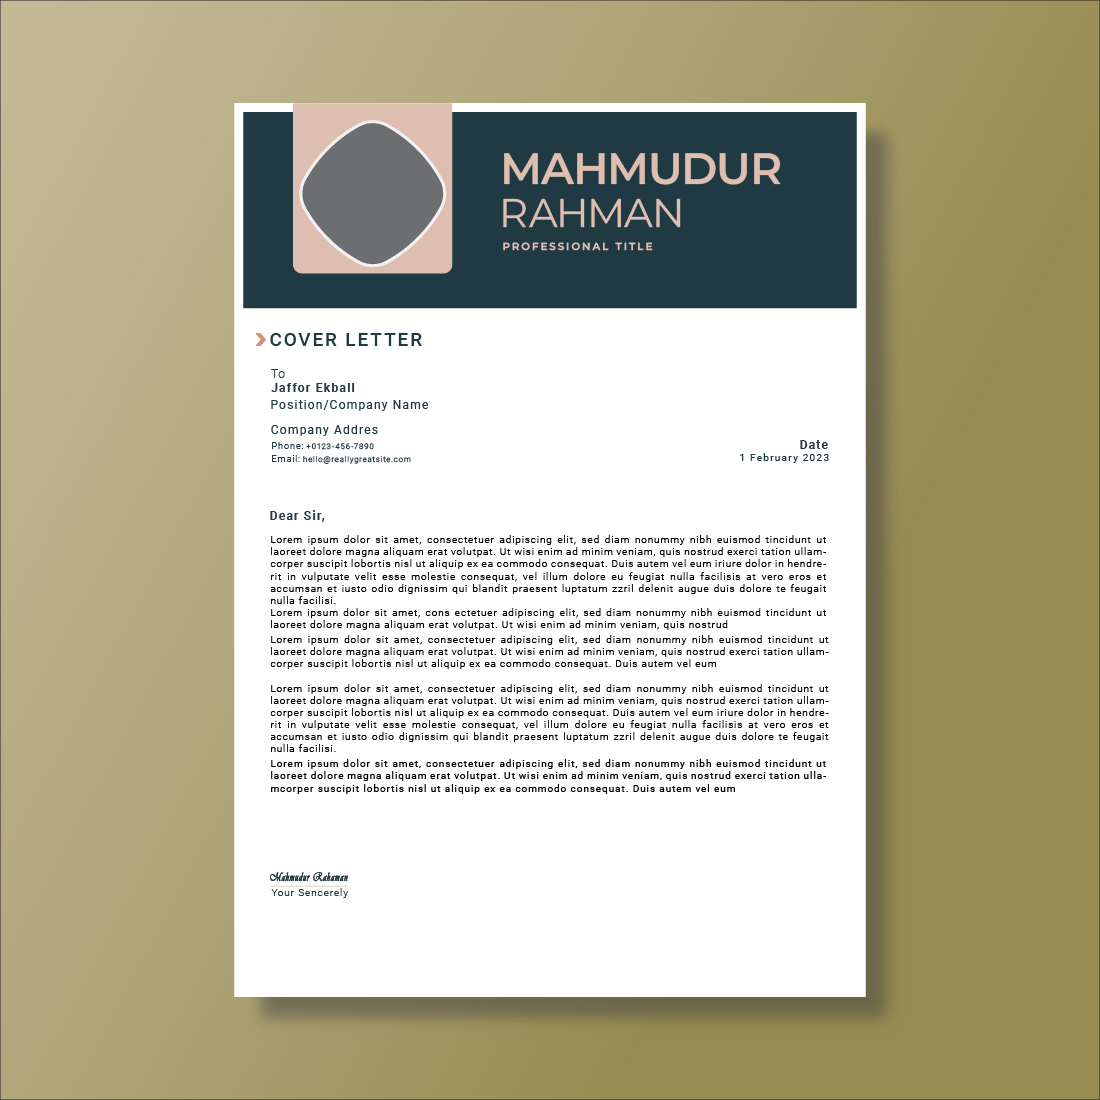 Cover letter for a business letterhead.